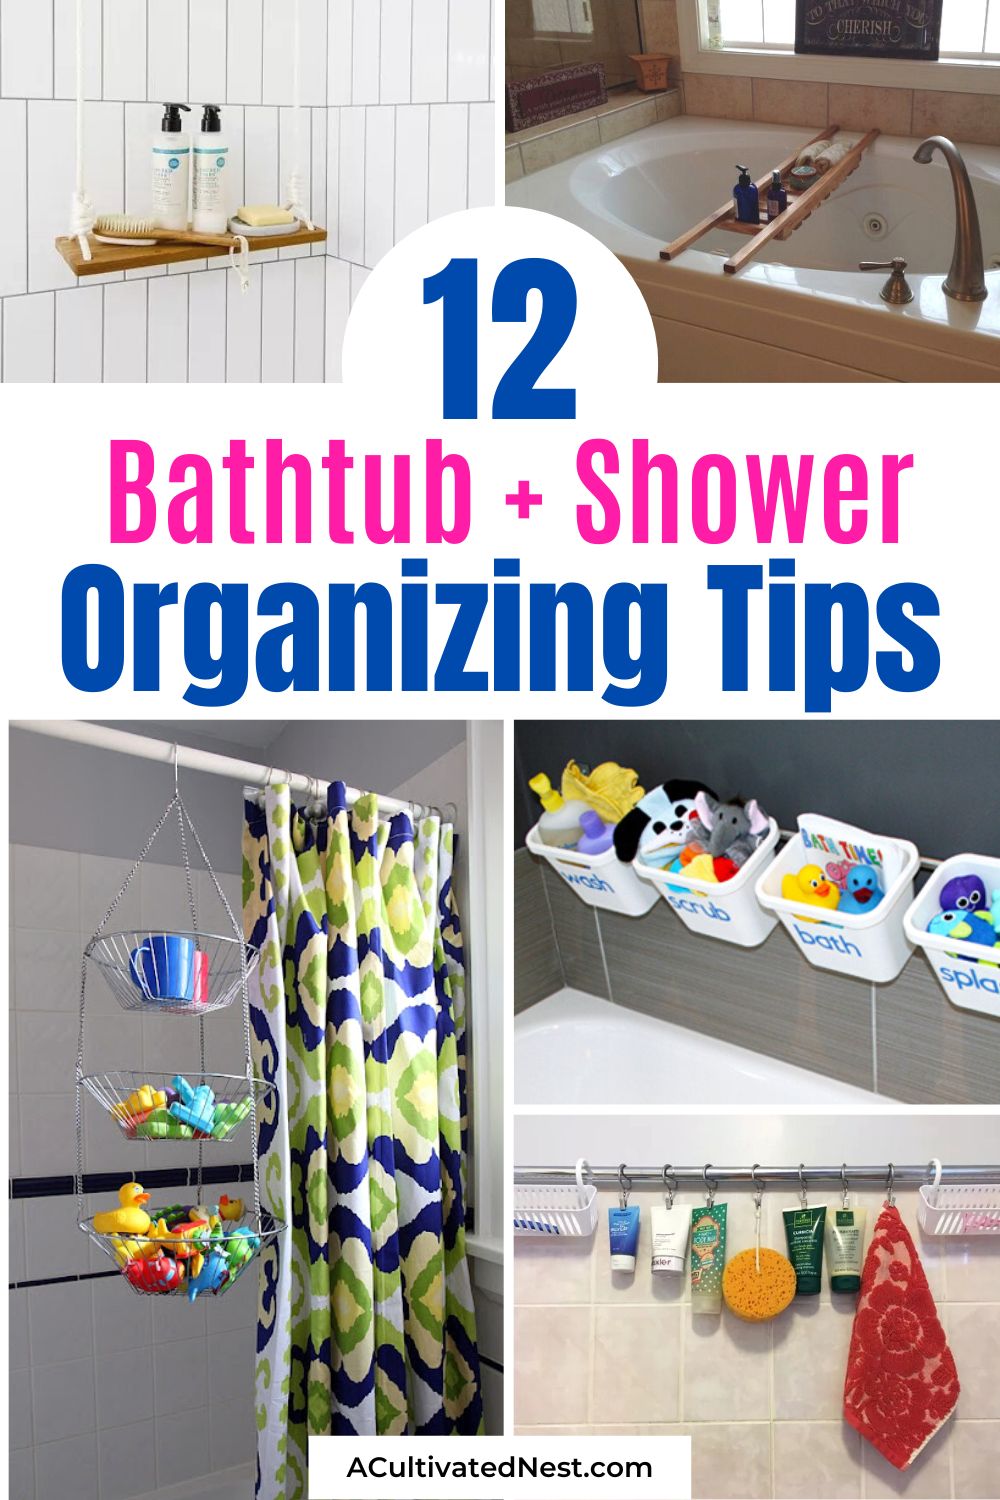 12 Genius Bathtub and Shower Organization Ideas- Tired of your cluttered and overwhelming bathroom? Check out these genius bathtub and shower organization ideas to help get a tidy and organized area! | #organizing #organizationTips #bathroomOrganization #homeOrganization #ACultivatedNest